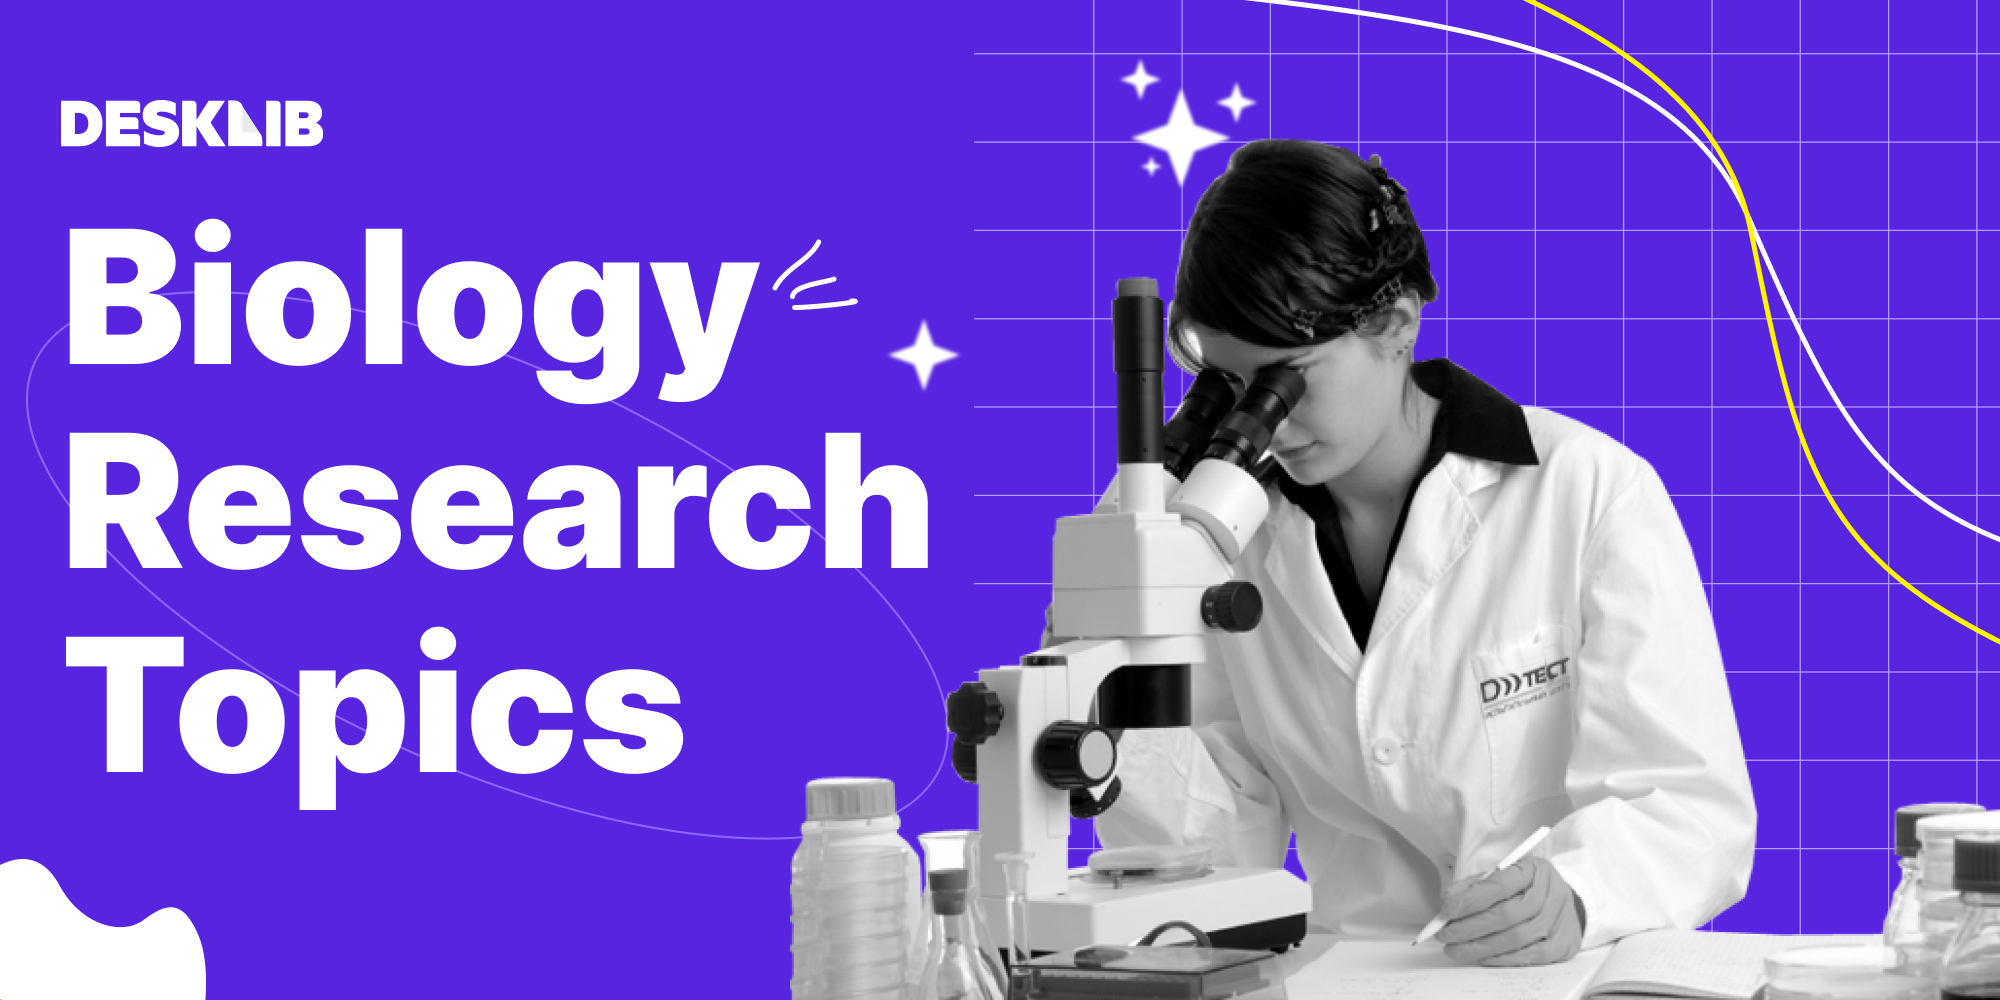 research topics on biology education